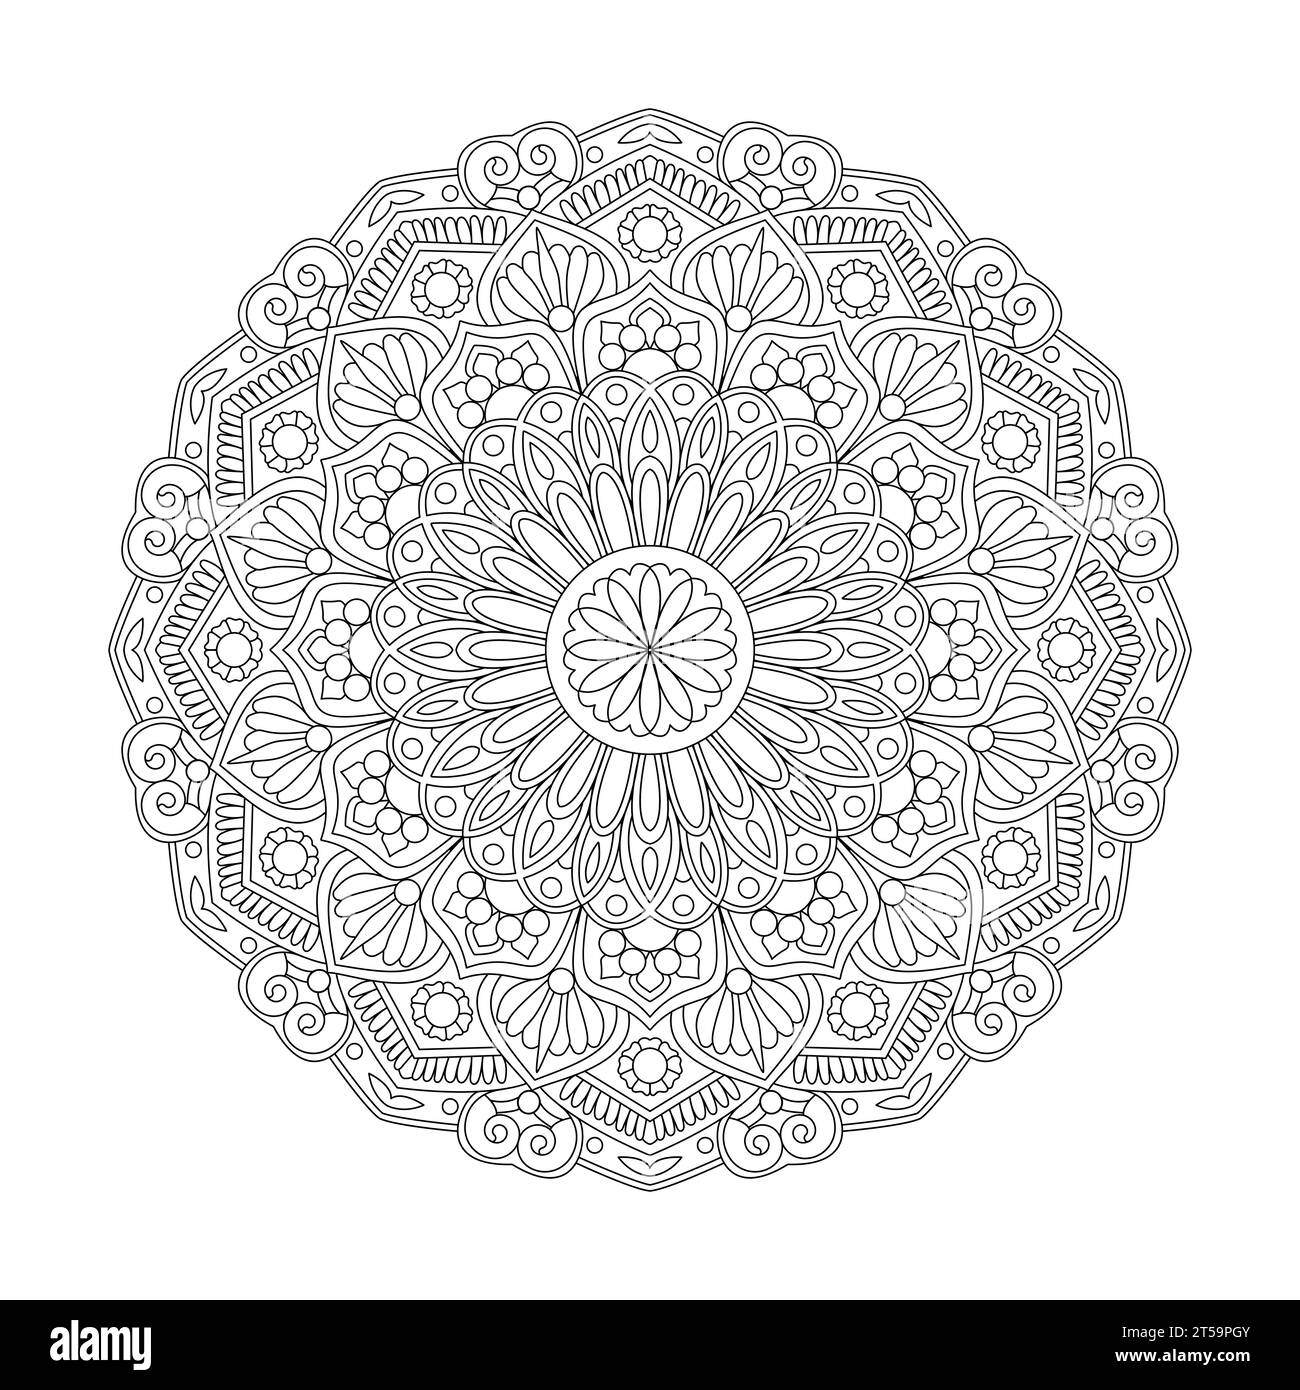 Adult Zen Harmony colouring book mandala page for KDP book interior. Peaceful Petals, Ability to Relax, Brain Experiences, Harmonious Haven, Peaceful P Stock Vector